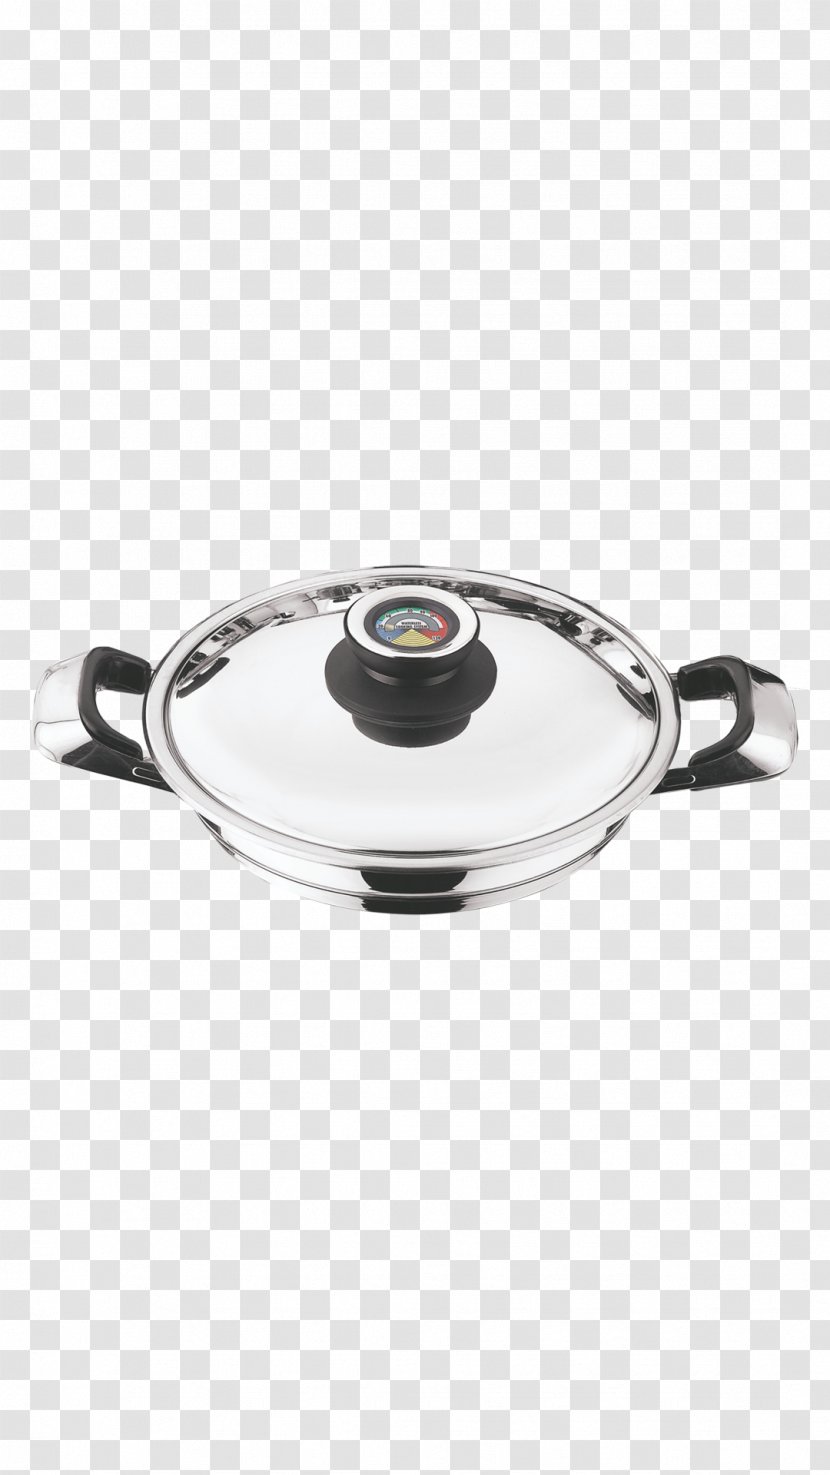 Frying Pan Tableware Cookware Cooking Lid - Raco Elements 28cm Deep Frypan With Transparent PNG